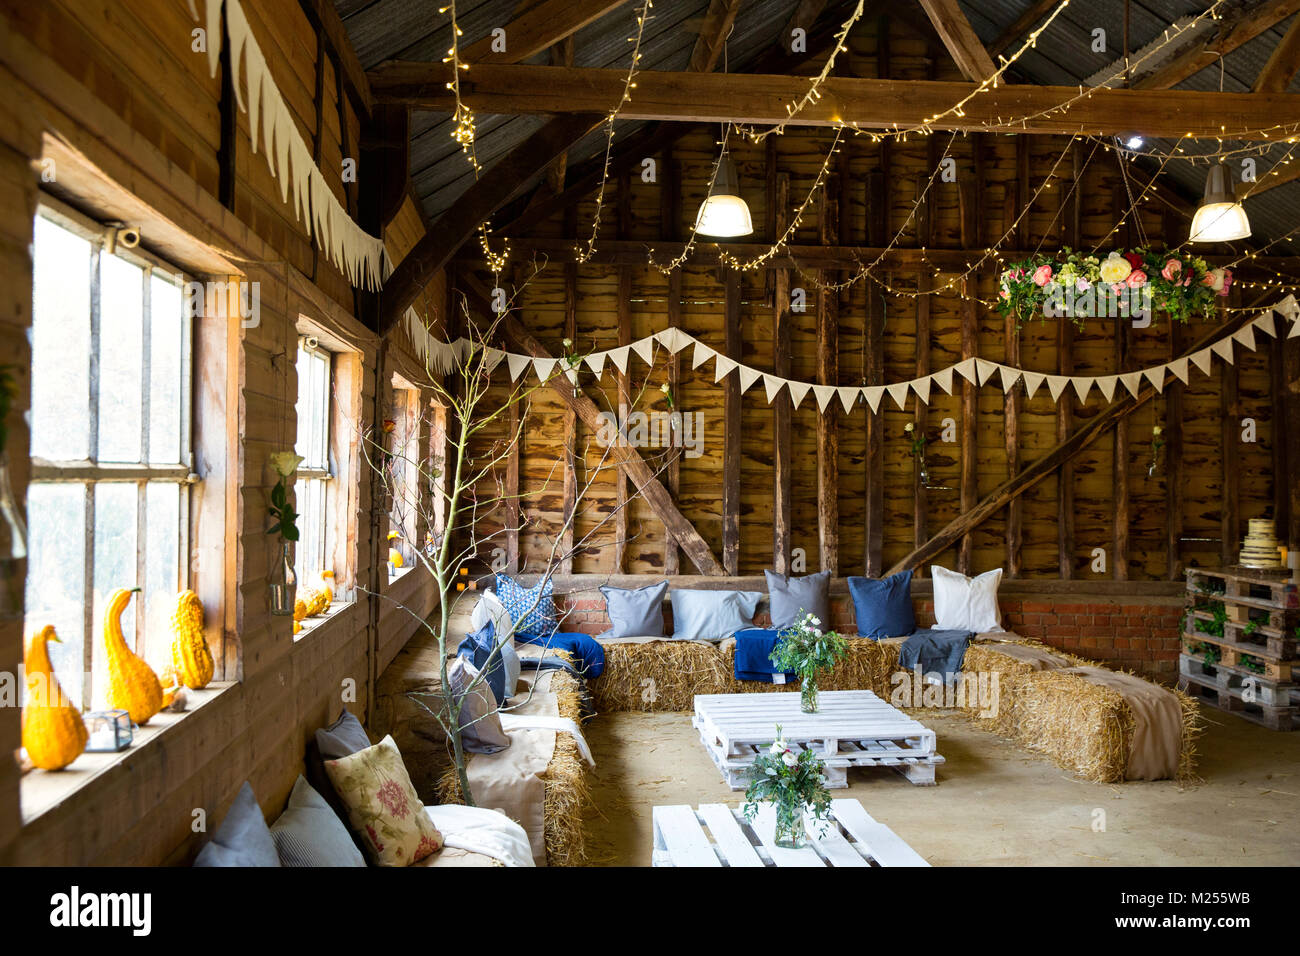 Barn decorated for special occasion with bunting and straw bale seating Stock Photo